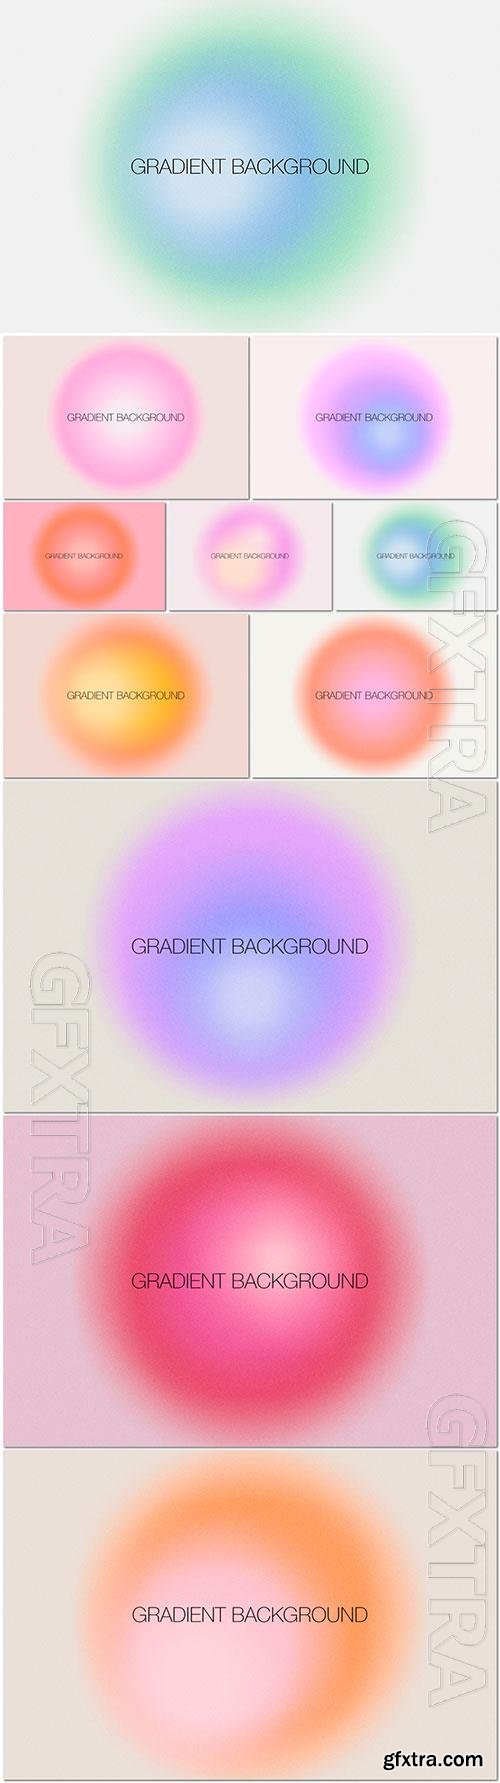 Abstract circle gradient with neutral background psd